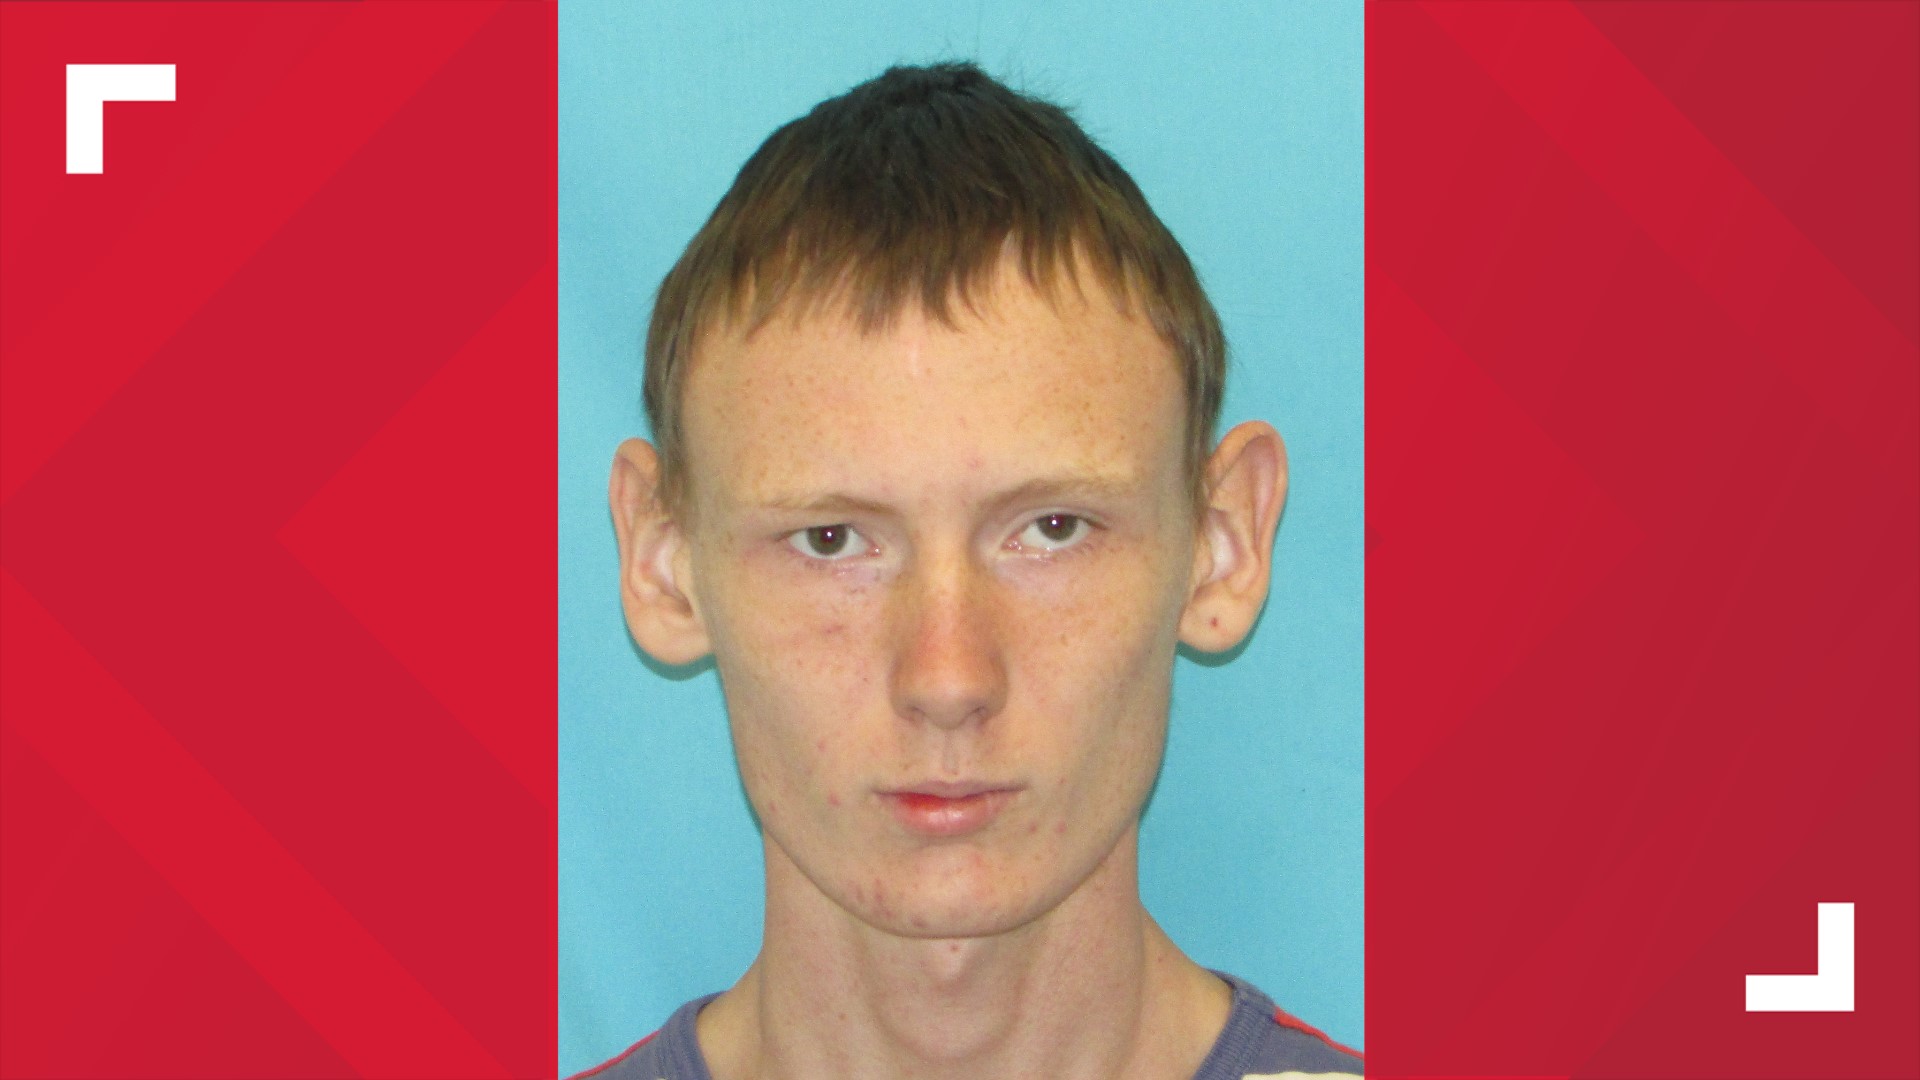 Gavin Golden is accused of displaying a BB gun that looked like a "genuine firearm" on a school bus Wednesday. The Lone Star High School student was arrested.